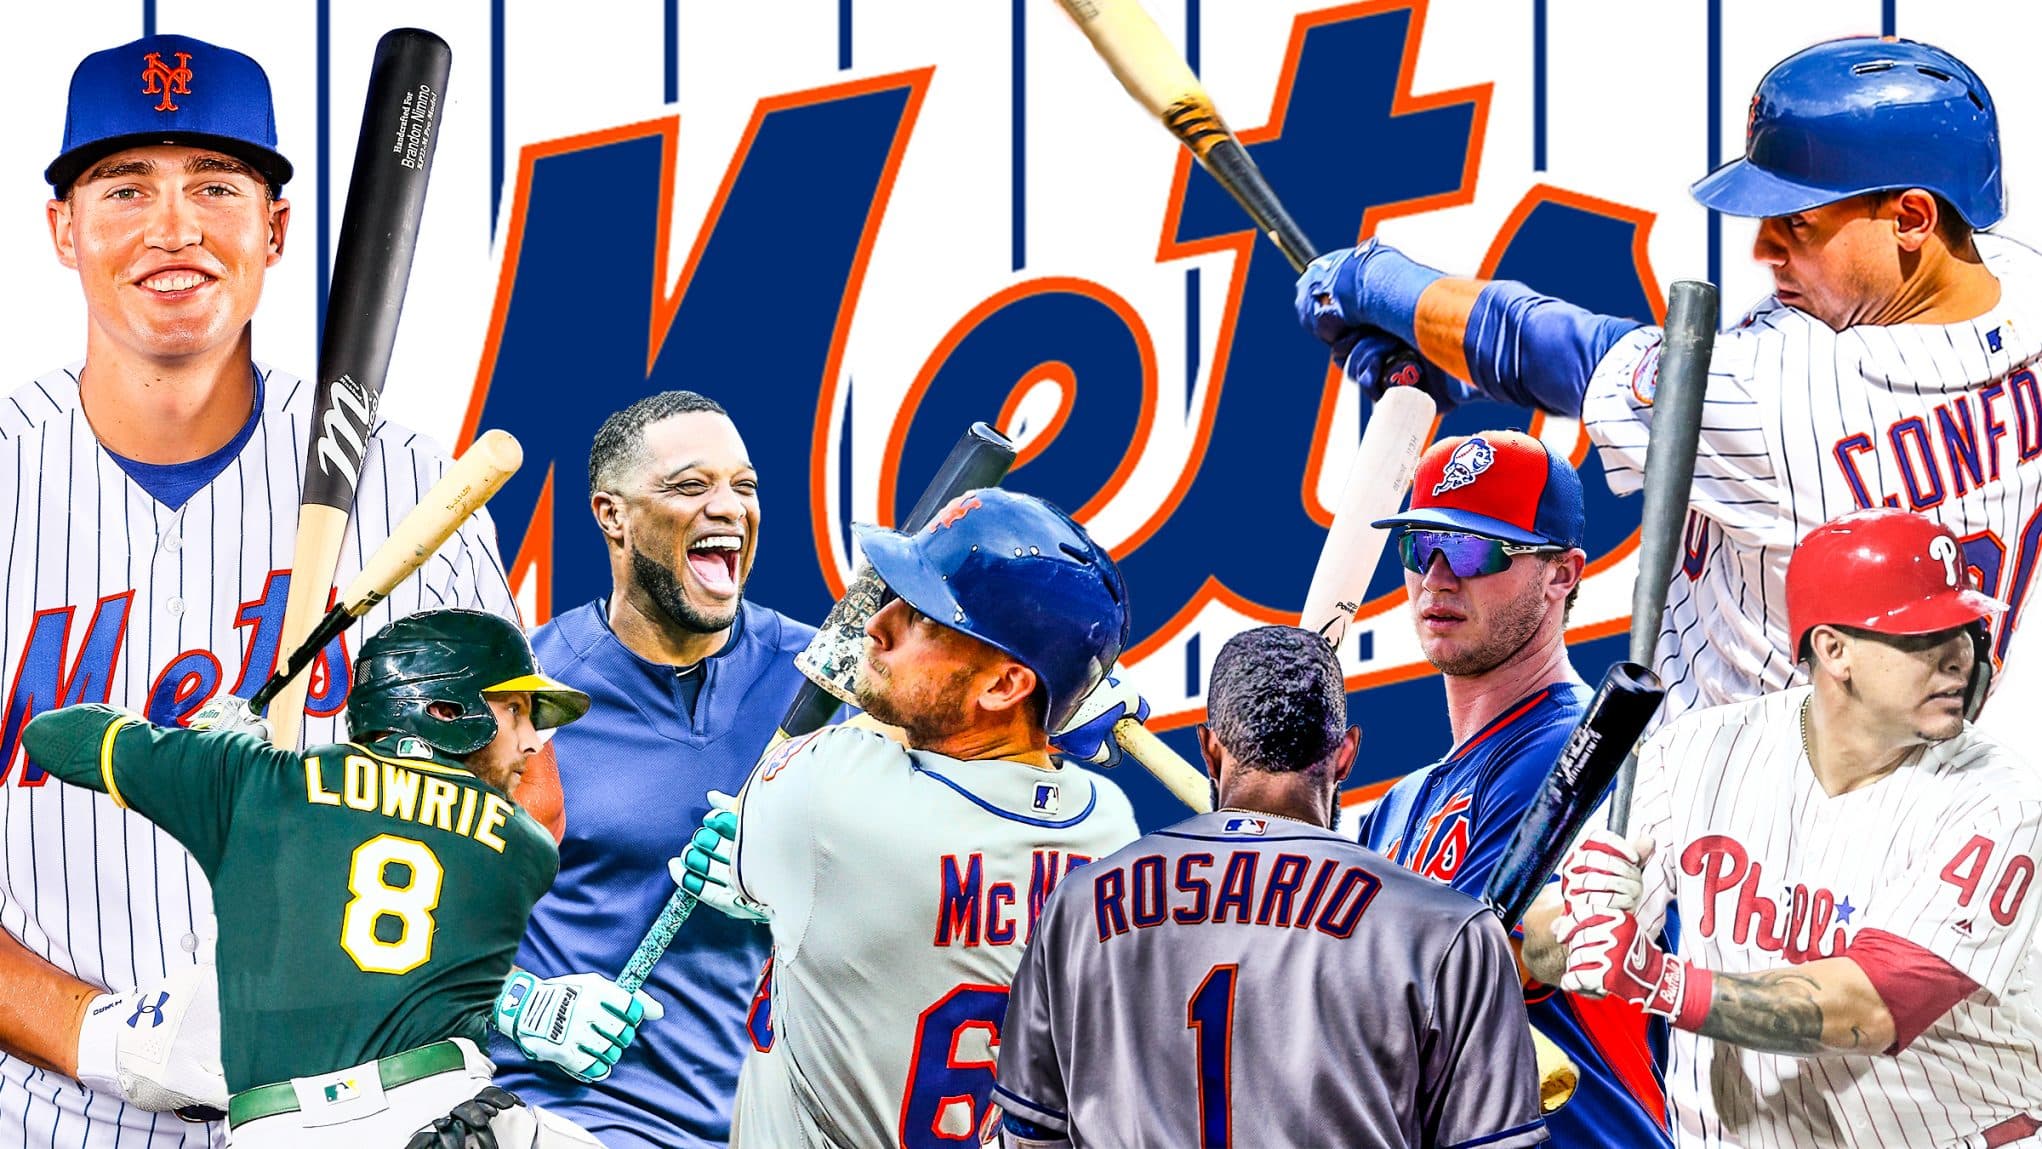 New York Mets 2019 Wallpaper FREE Picture